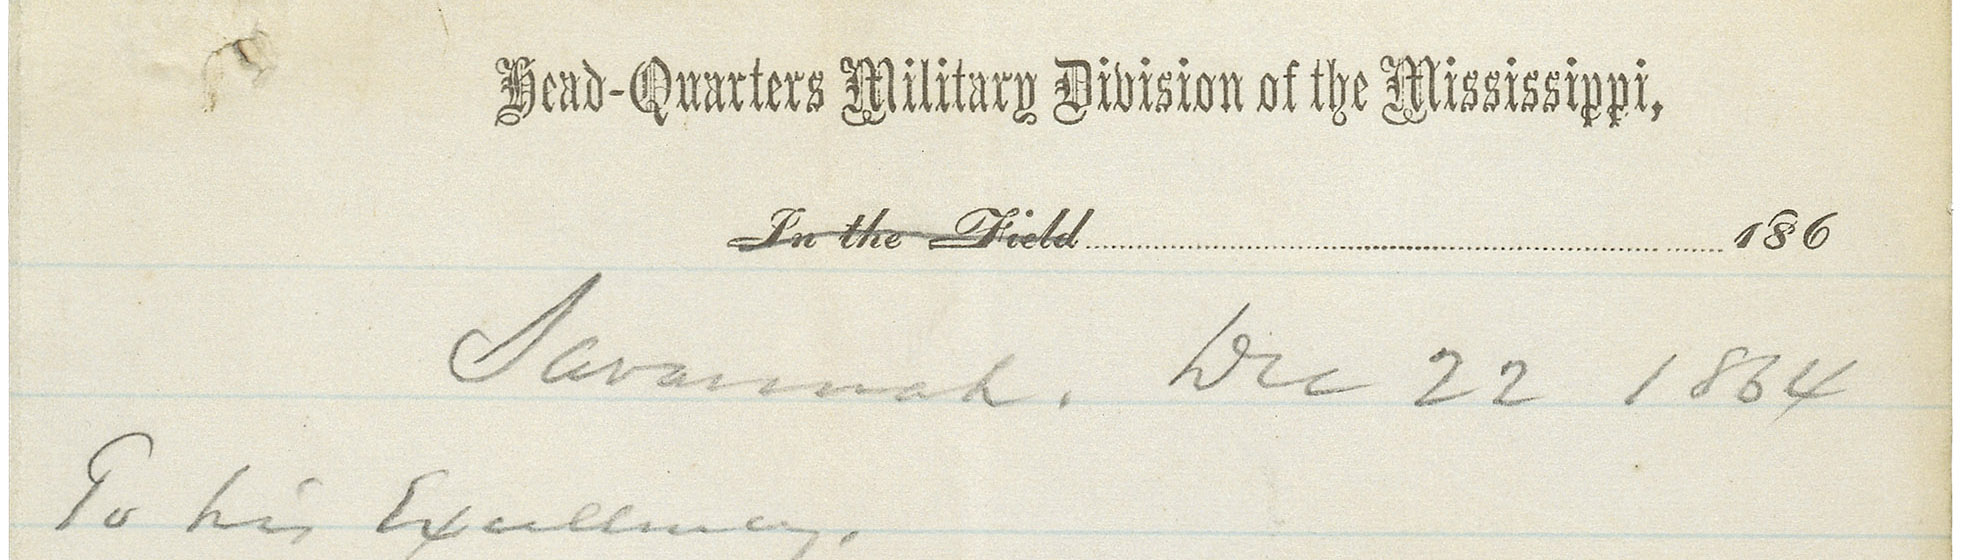 Records of the Office of the Secretary of War